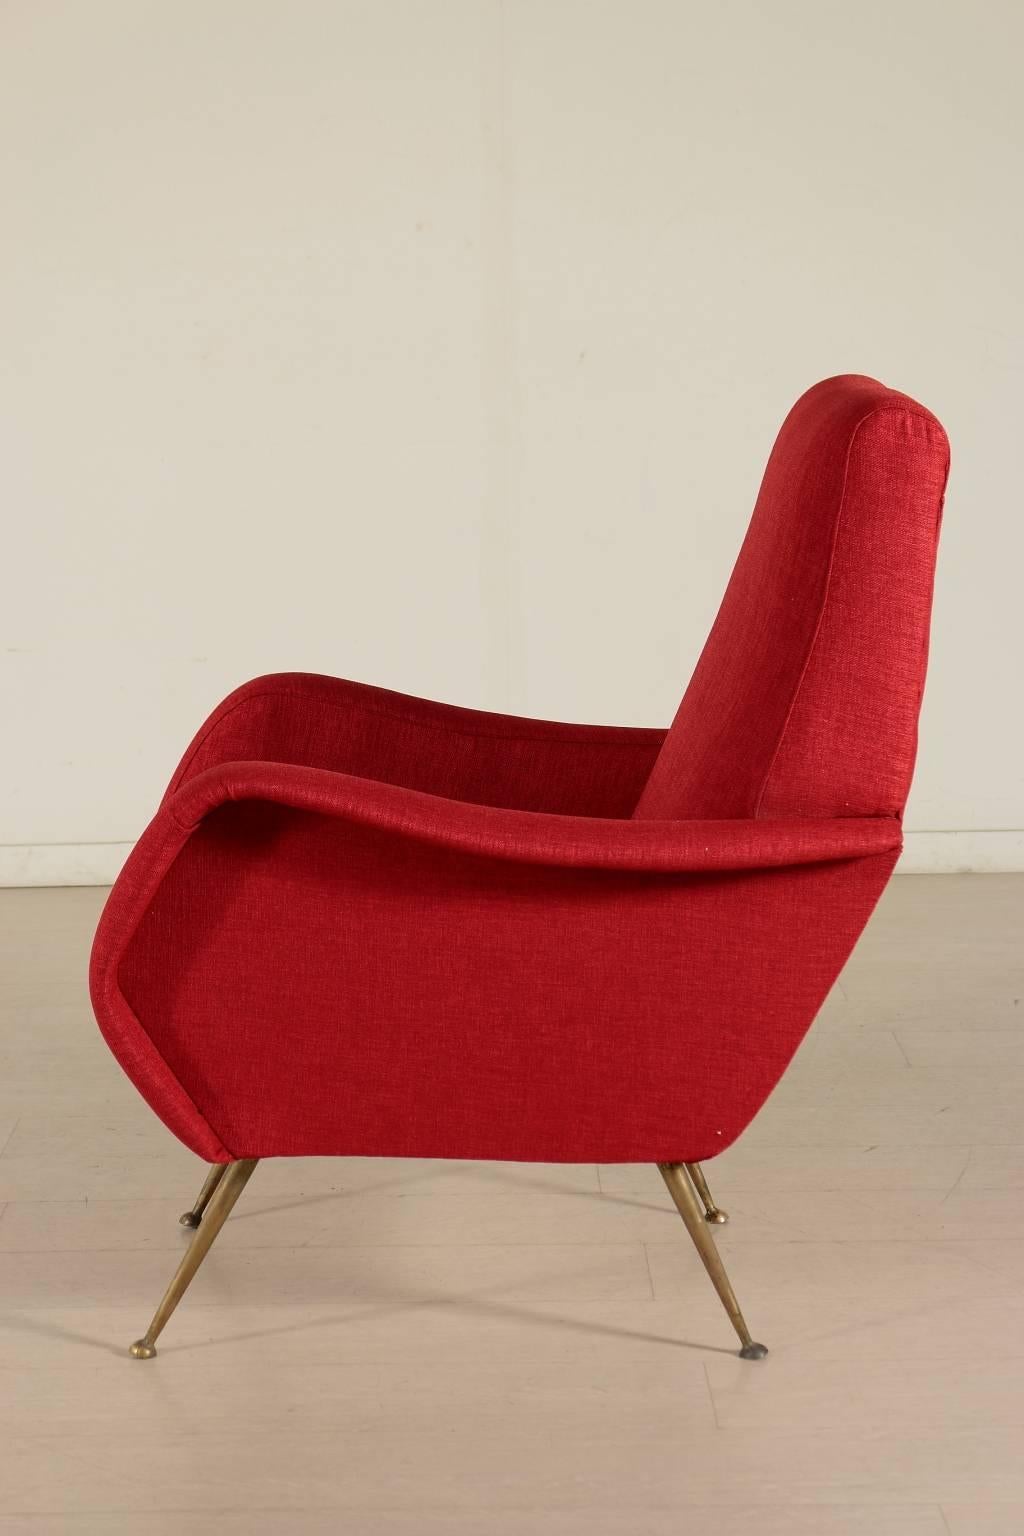 An armchair, foam padding, fabric upholstery, brass legs. Manufactured in Italy, 1950s.